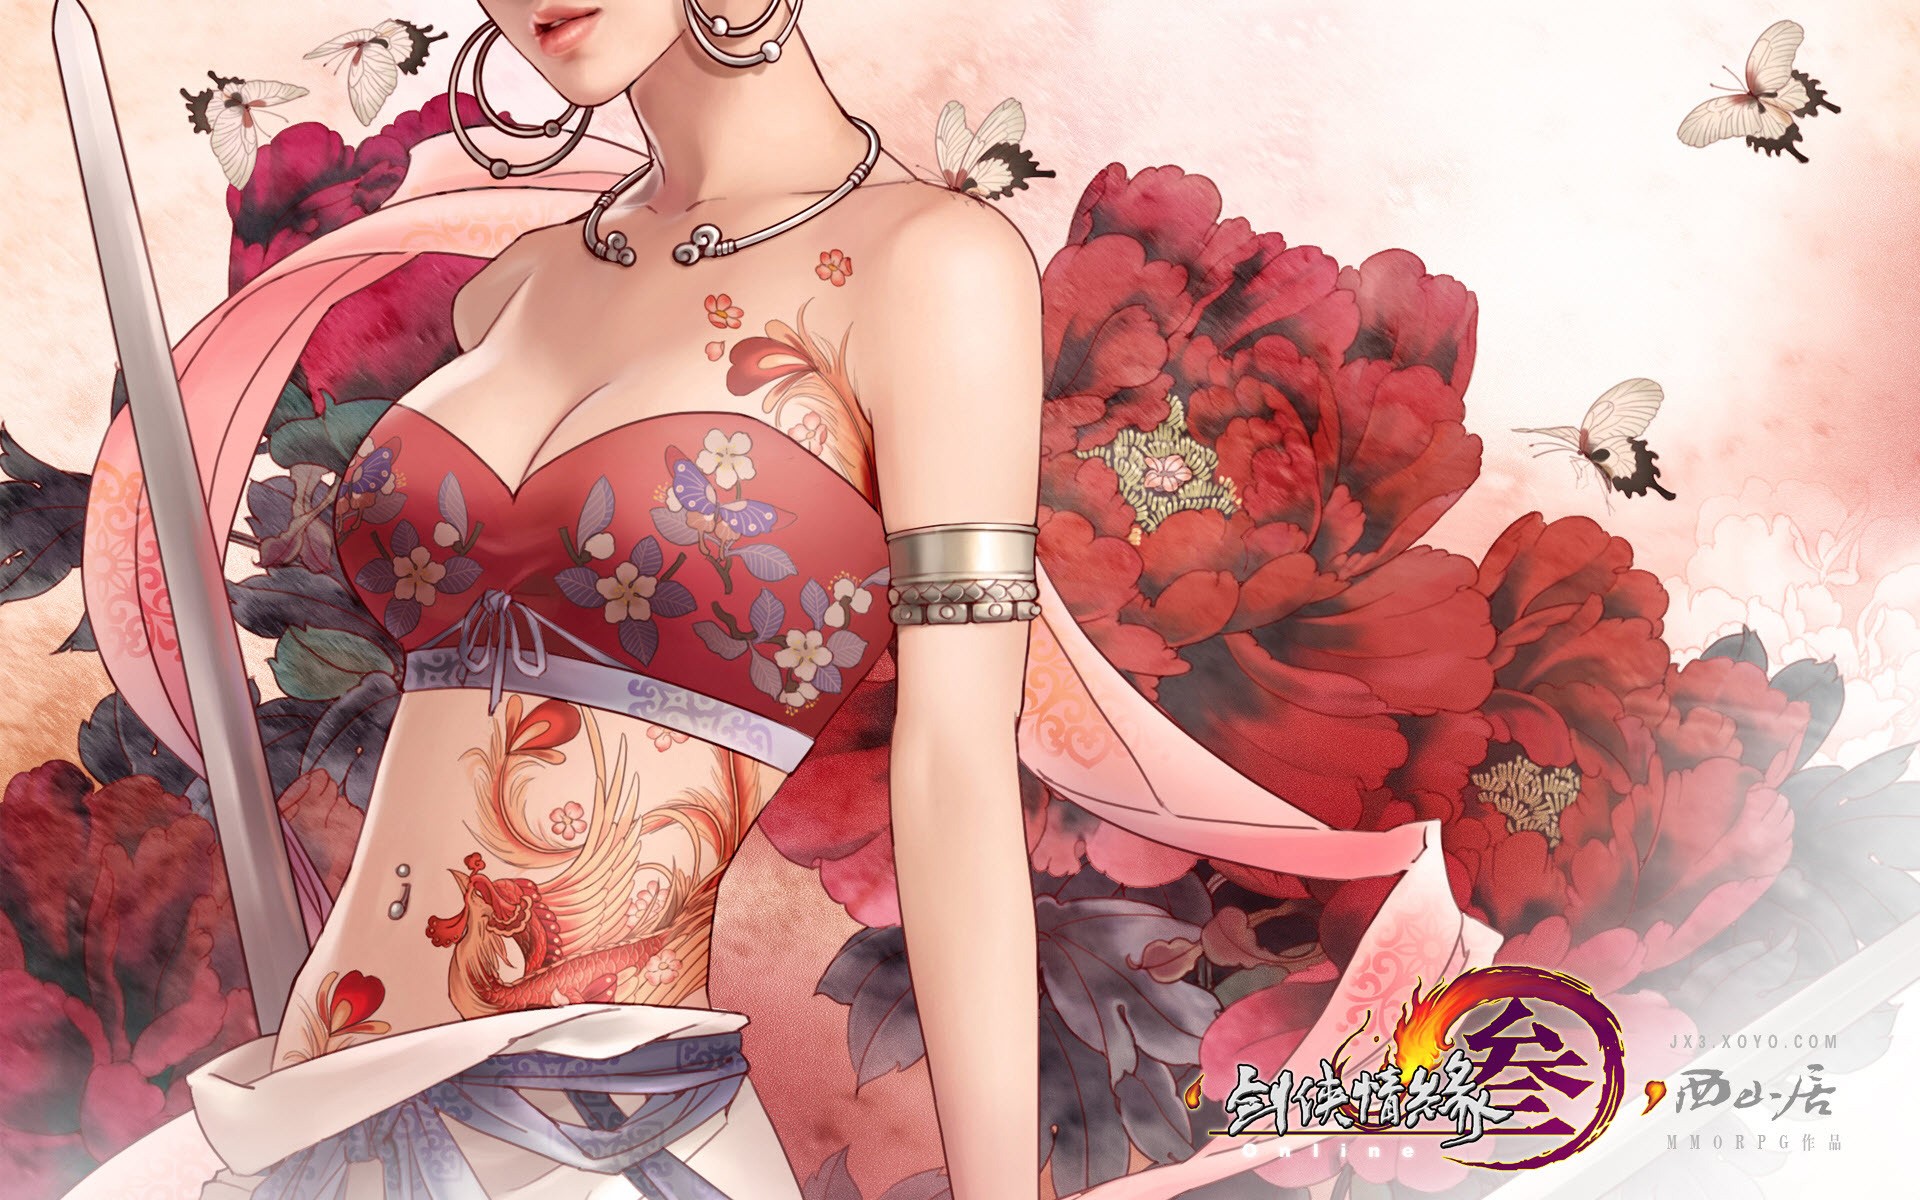 General 1920x1200 video games women tattoo sword boobs cleavage bra inked girls women with swords red lipstick fantasy art fantasy girl pierced navel belly video game art butterfly animals insect weapon hoop earrings earring video game girls